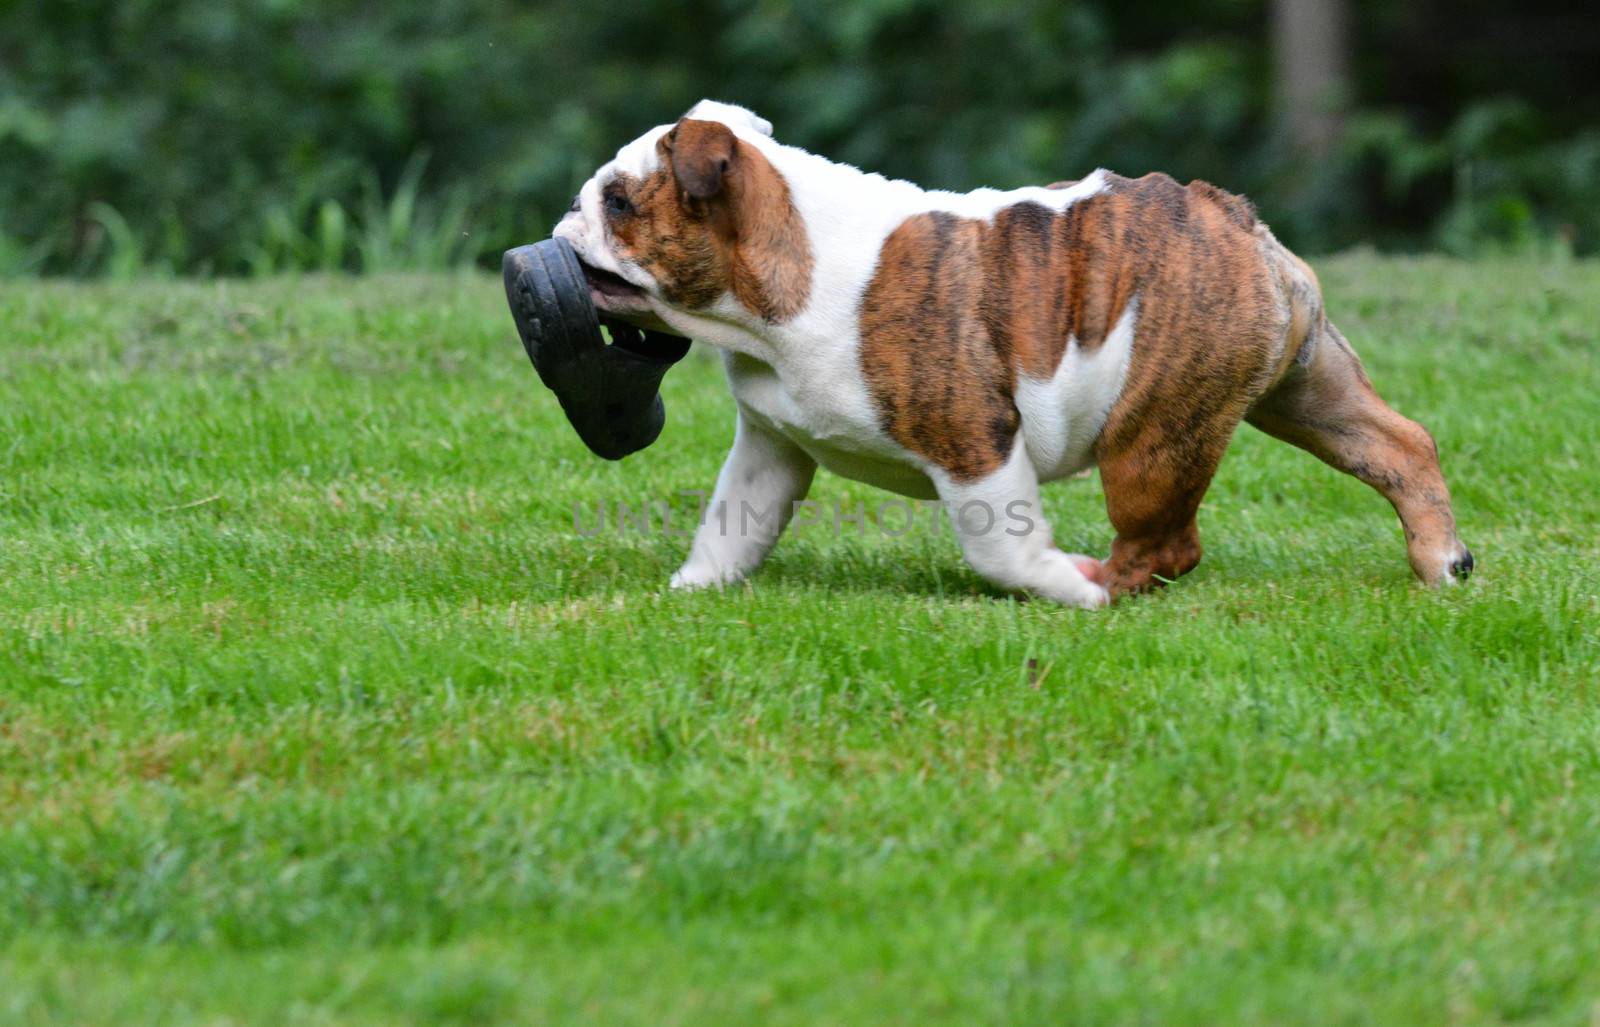 puppy running with shoe in mouth outside in the grass - bulldog